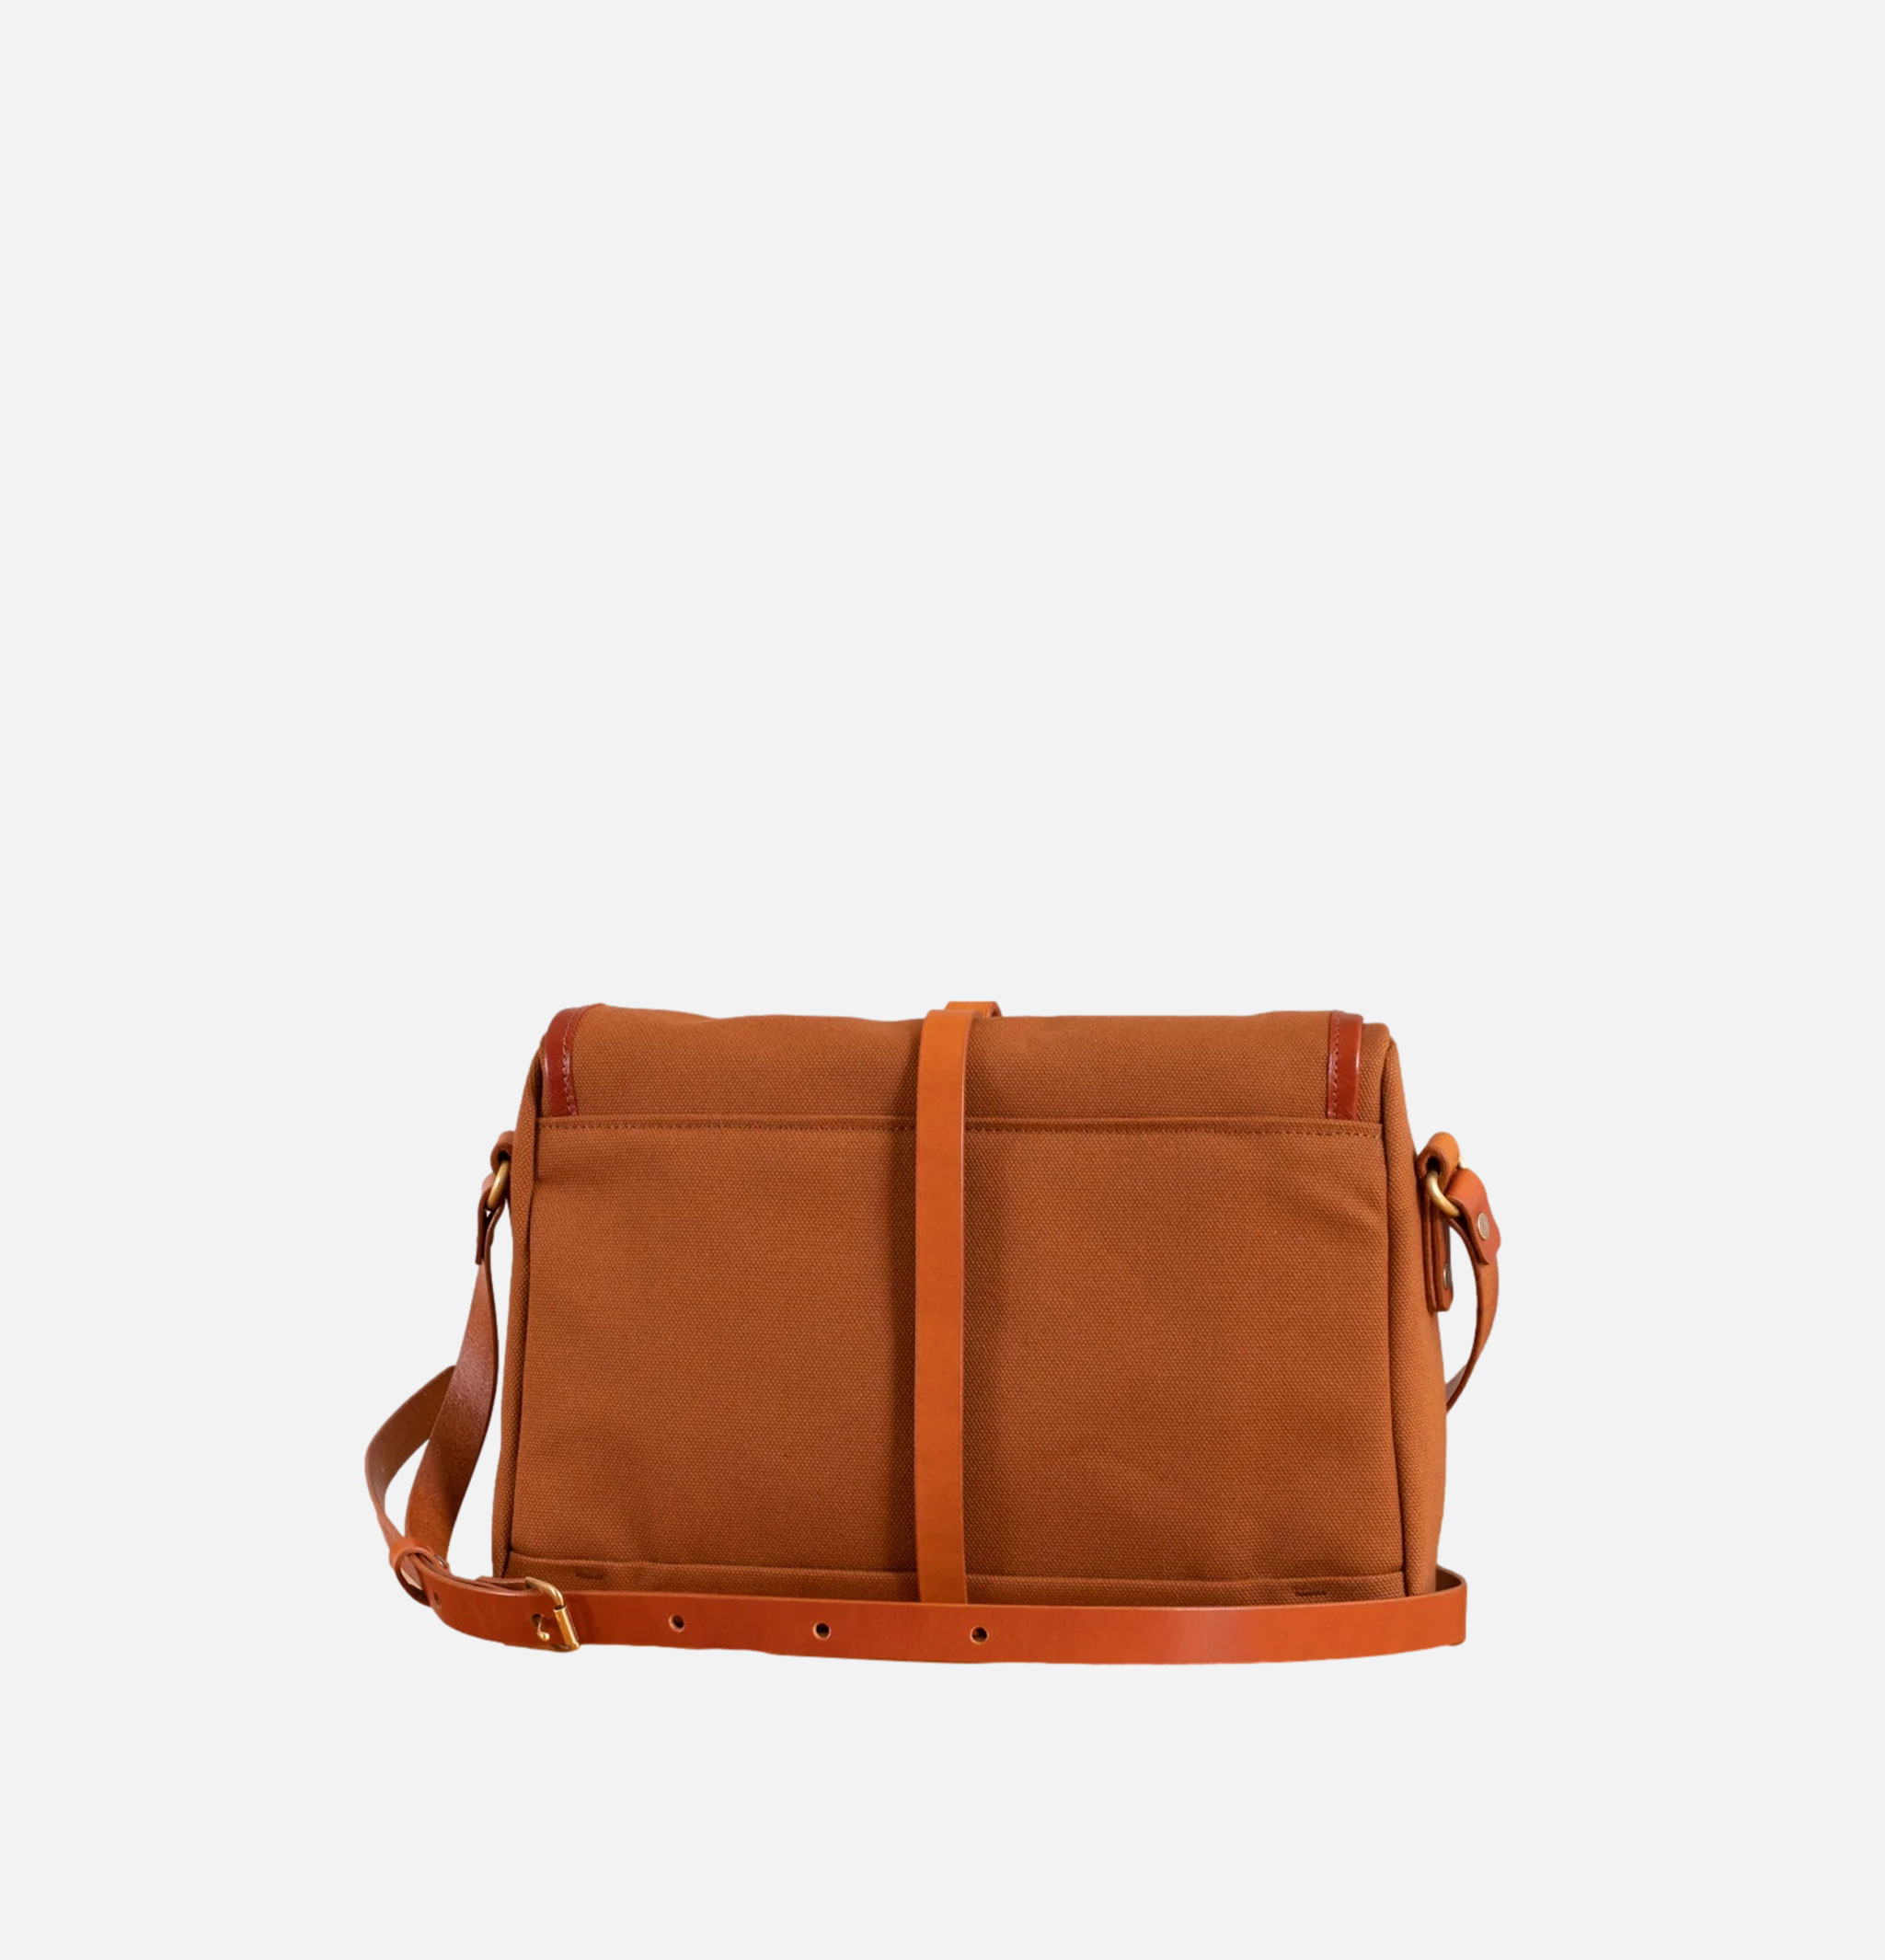 Persimmon & Tan Satchel from Southern Field